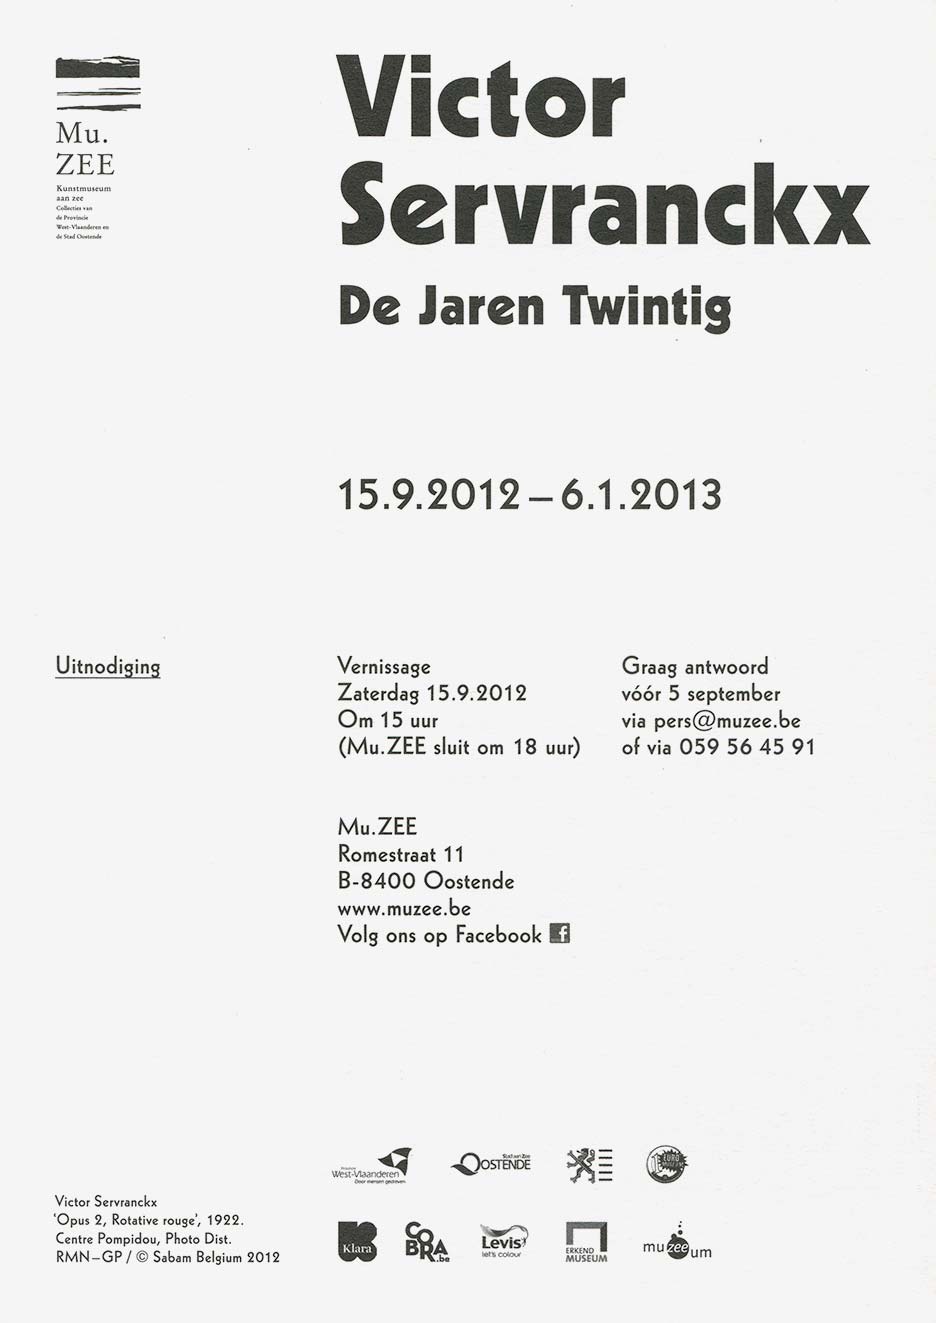 Back of invite featuring details about the exhibition